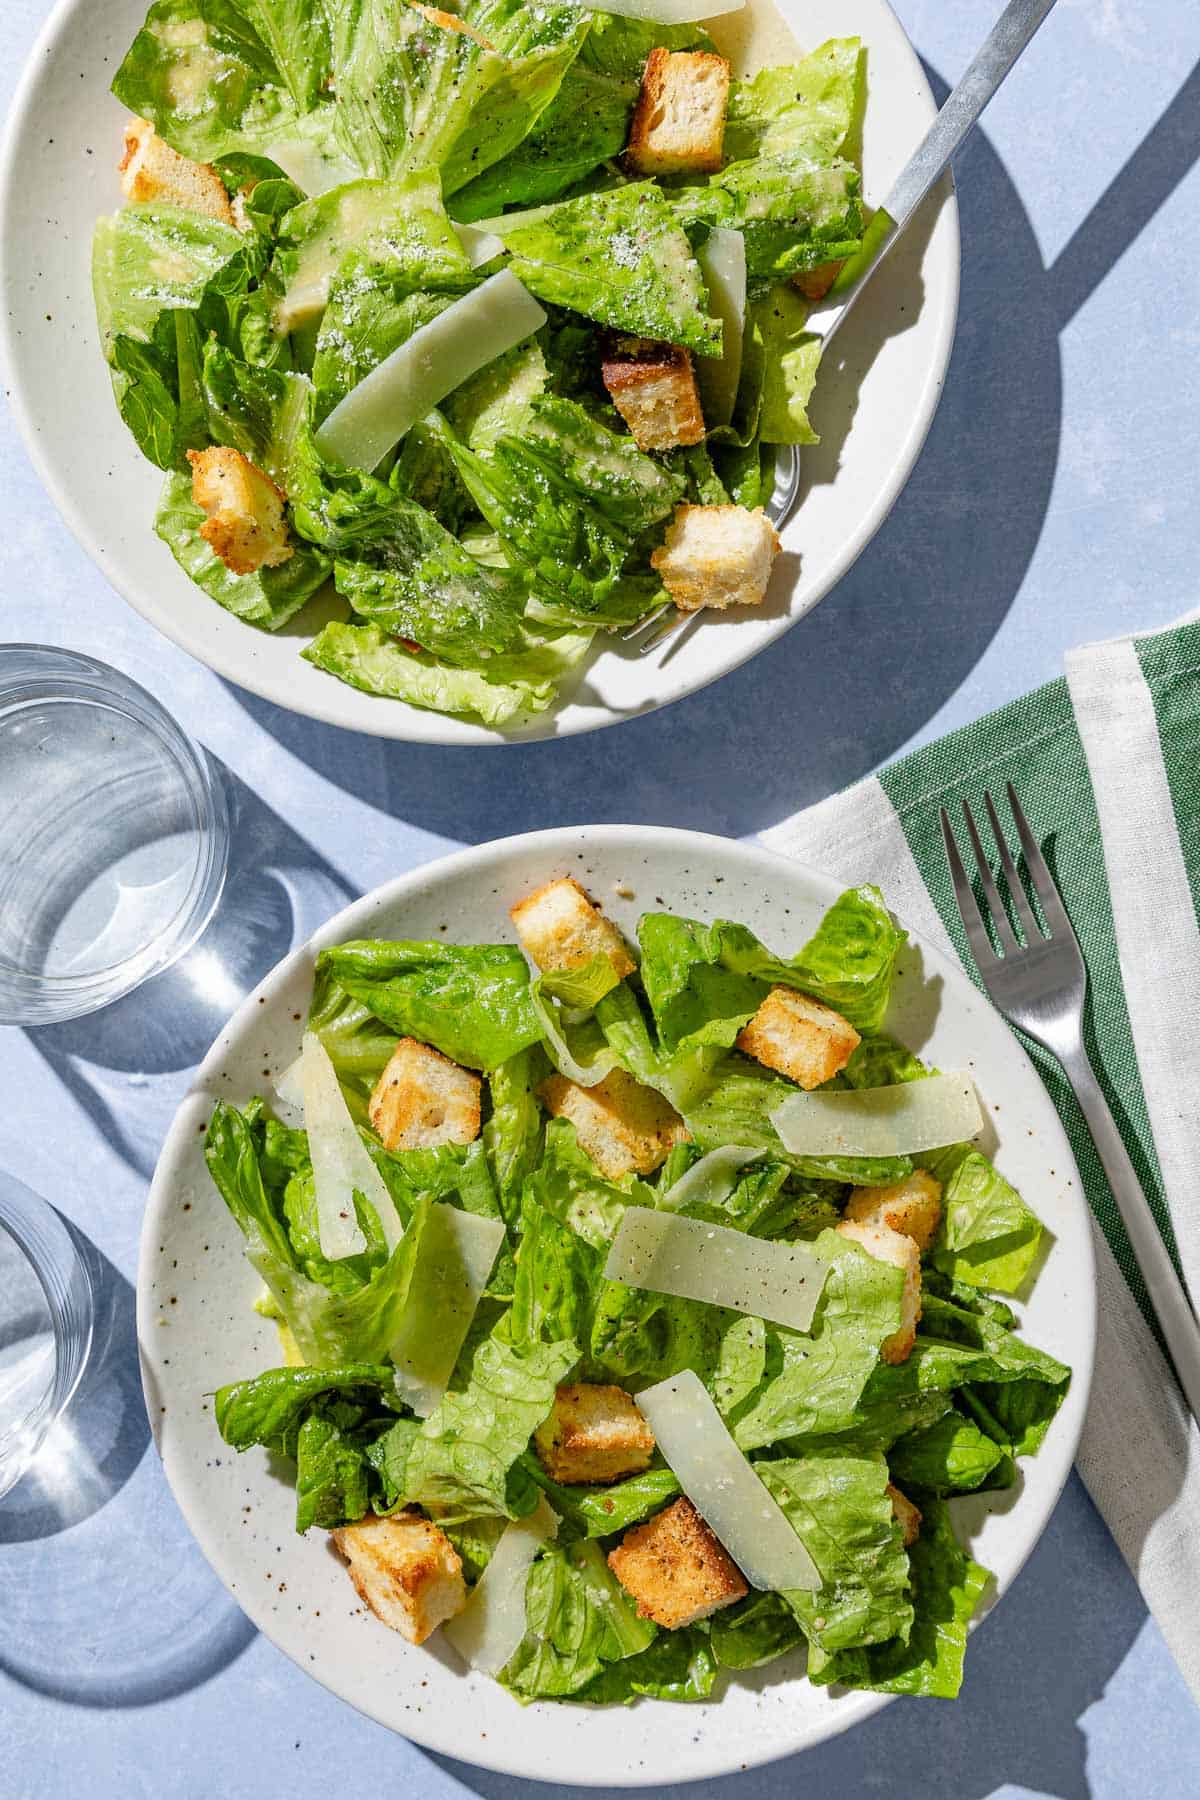 An overhead photo of 2 servings of caesar salad on plates with forks. Next to this is a cloth napkin and 2 glasses of water.